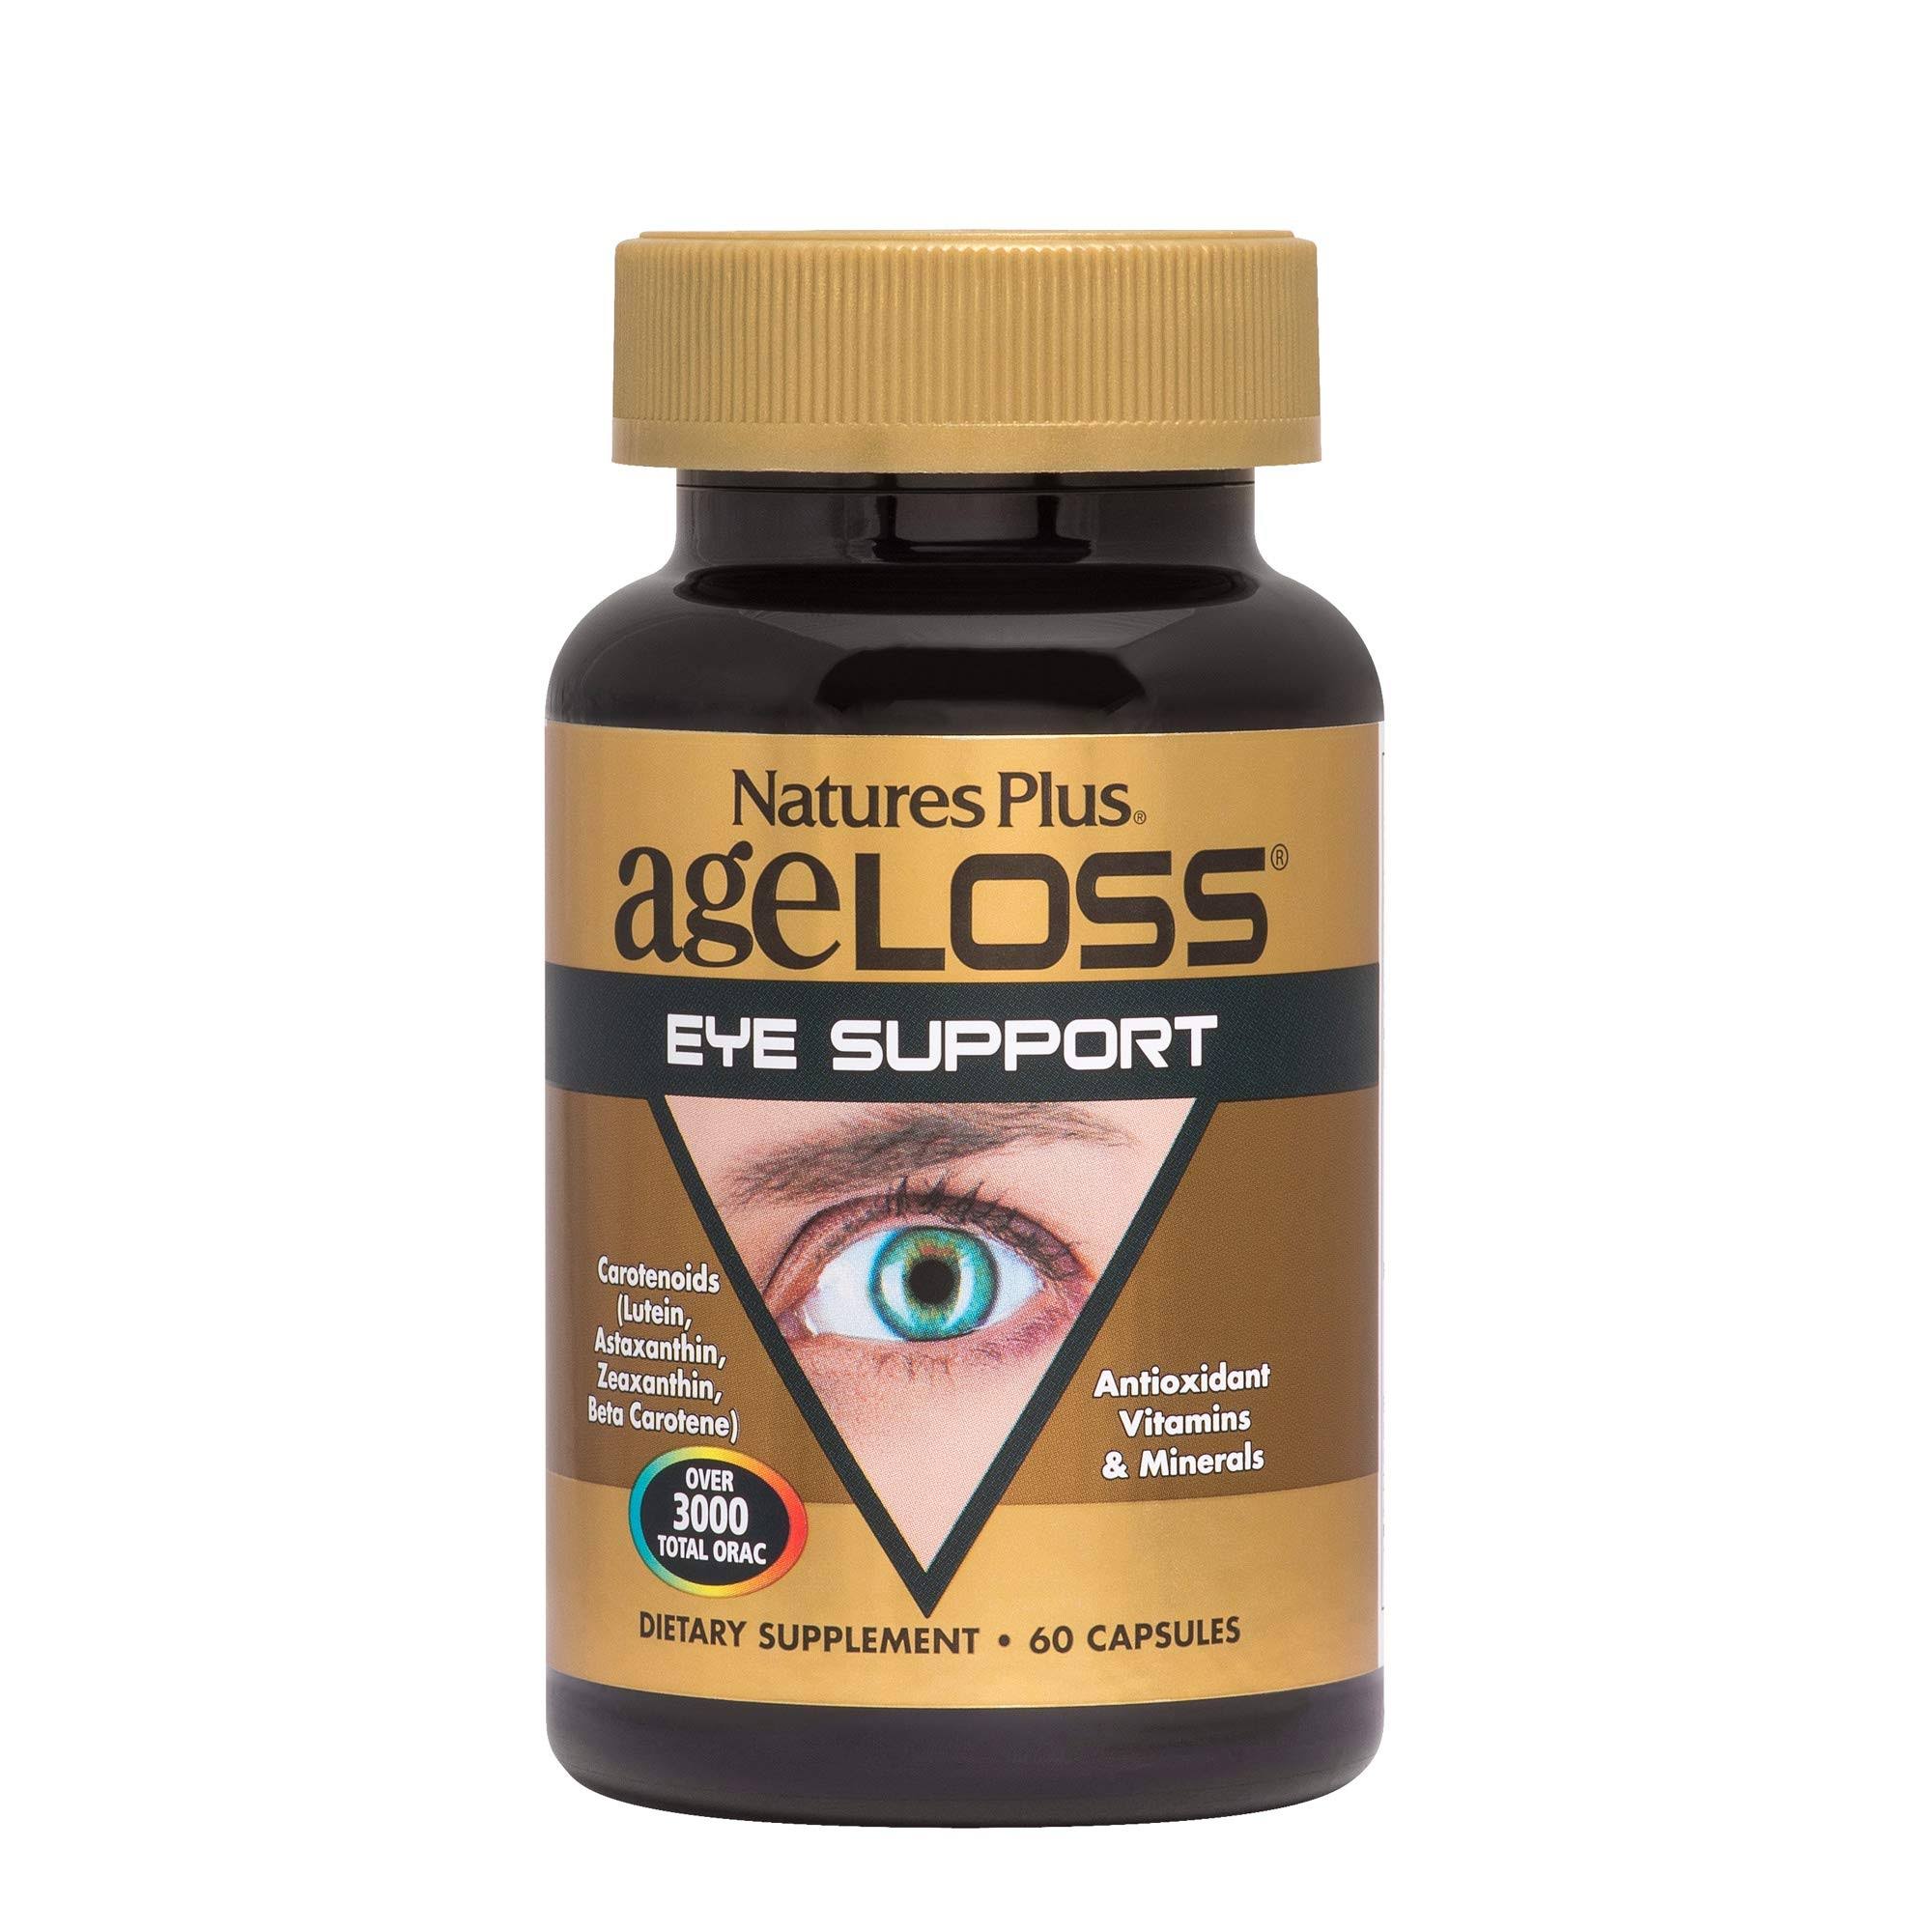 Nature's Plus Ageloss Eye Support Capsules